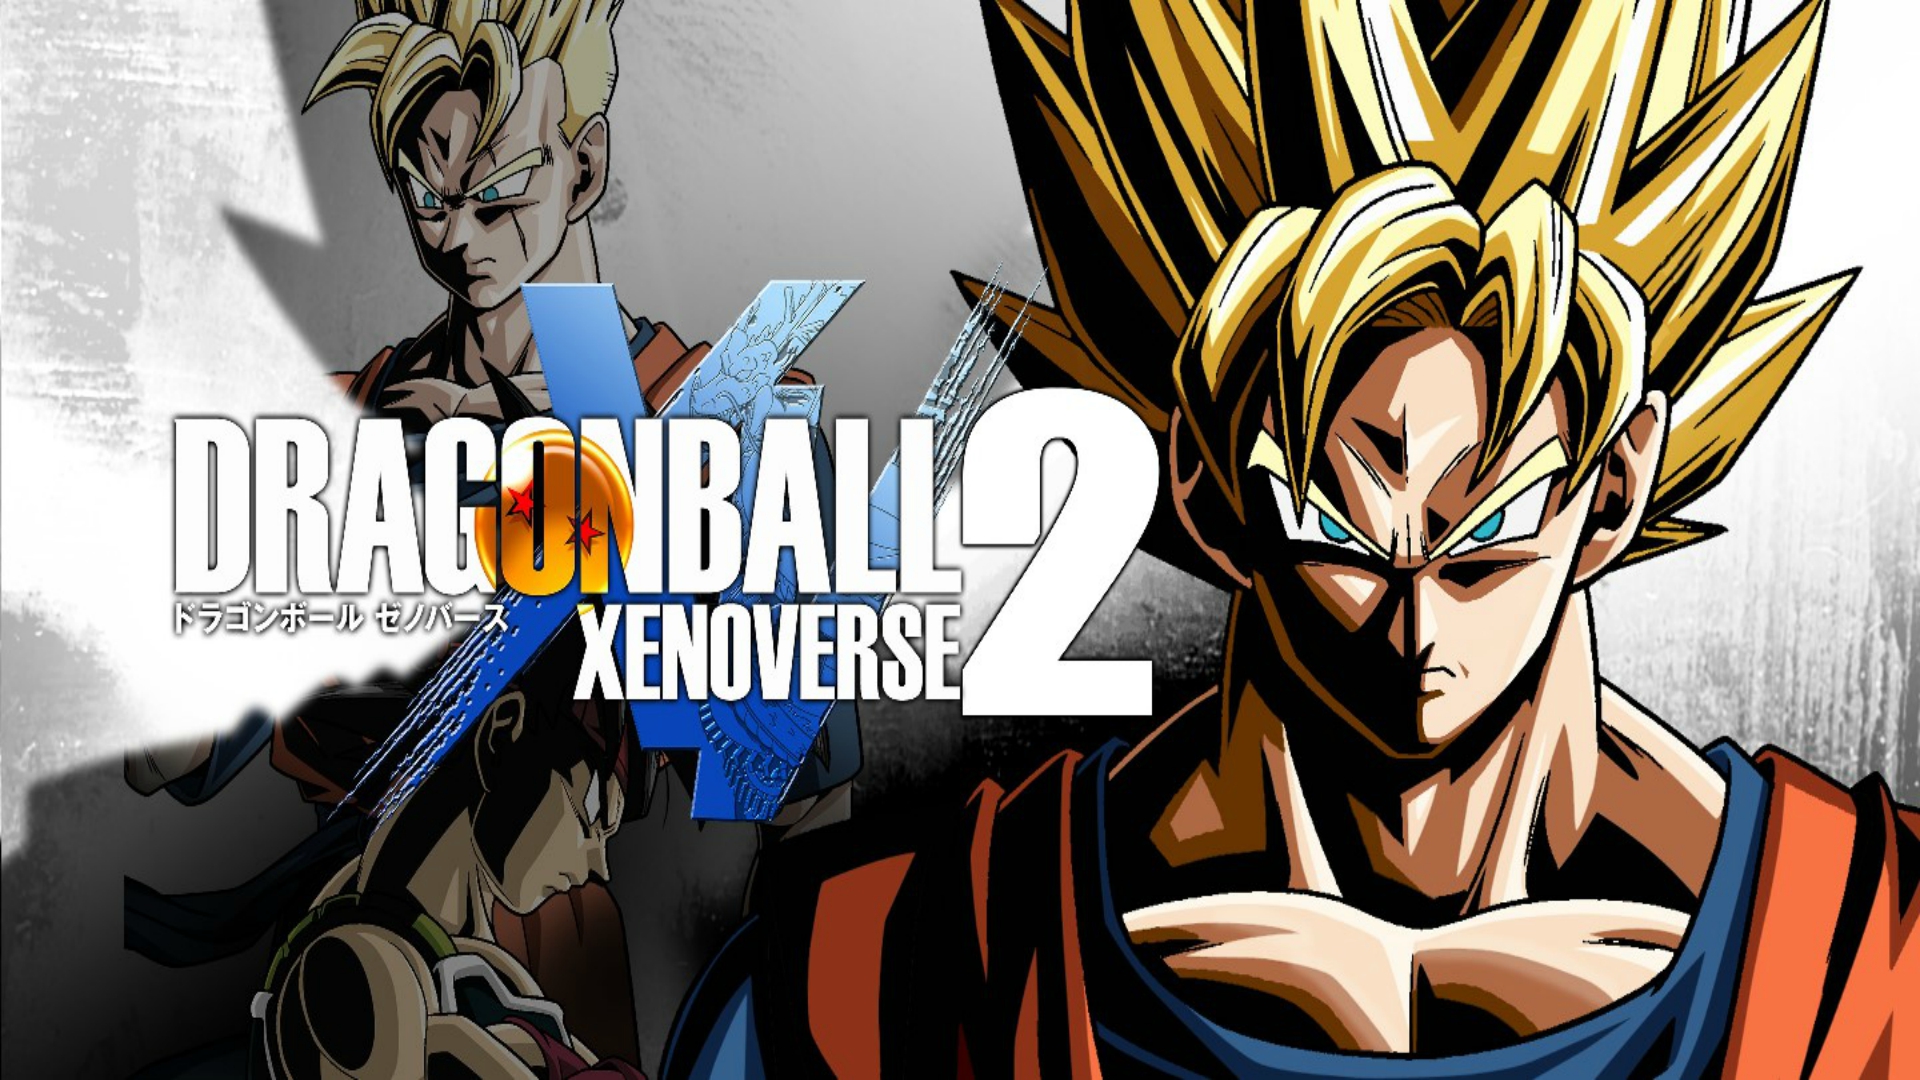 Dragon Ball Xenoverse 2 to Hit the Nintendo Switch on 22nd September